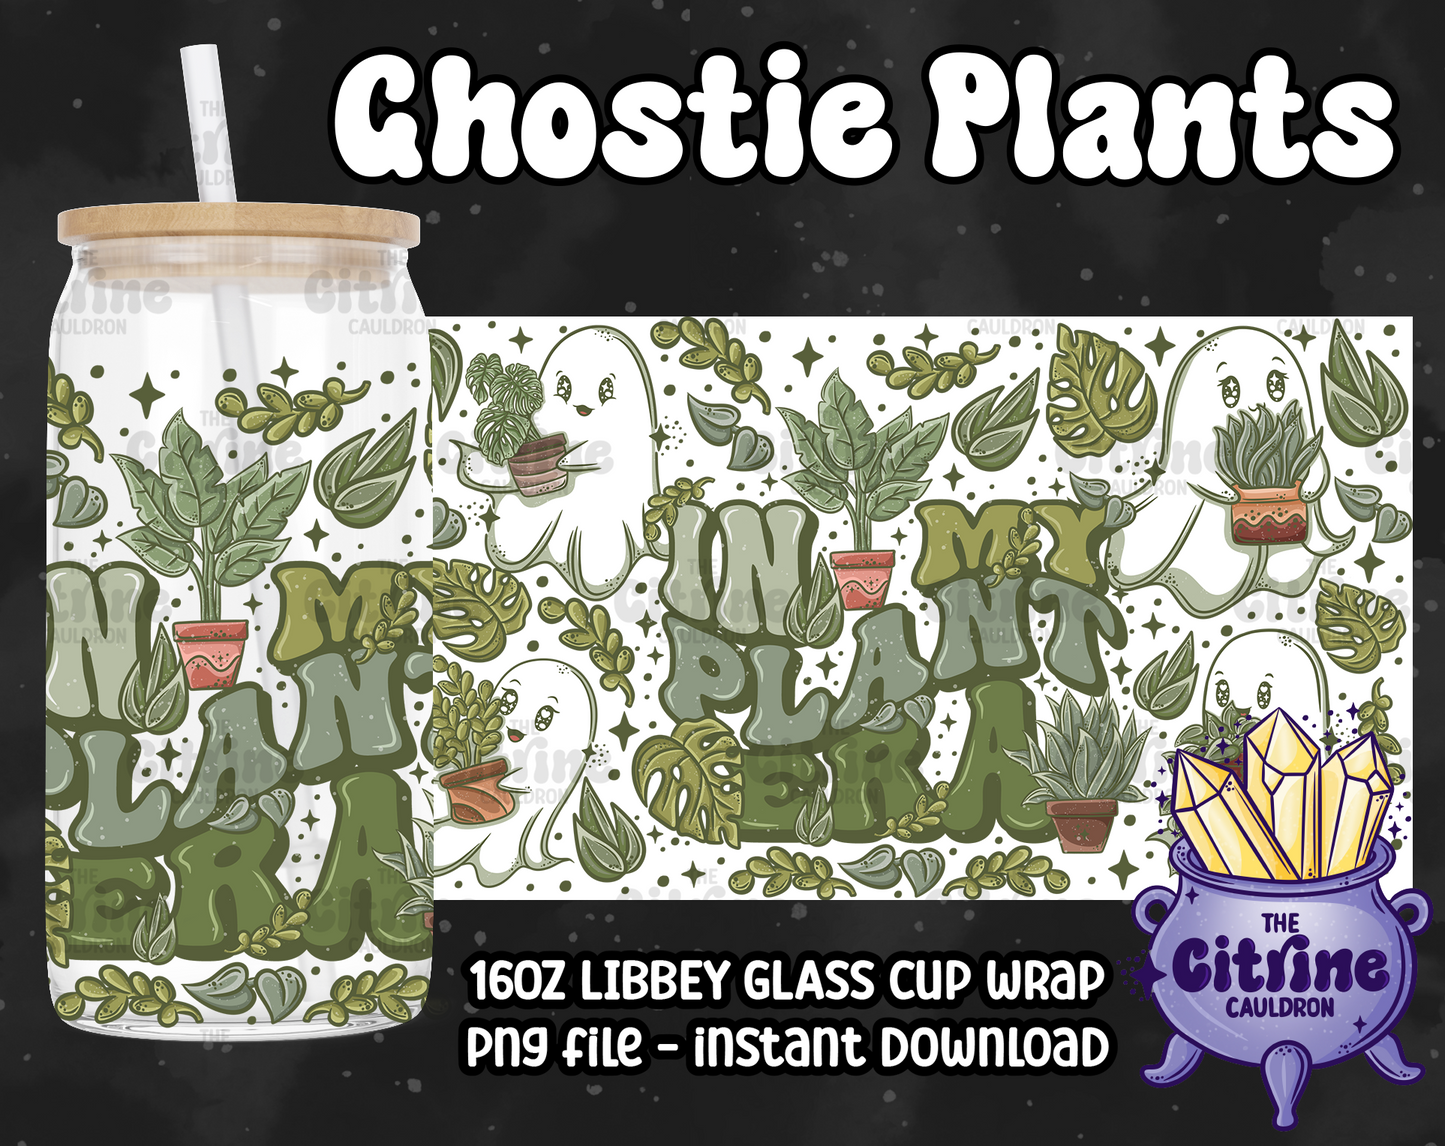 Ghostie Plants - PNG Wrap for Libbey 16oz Glass Can